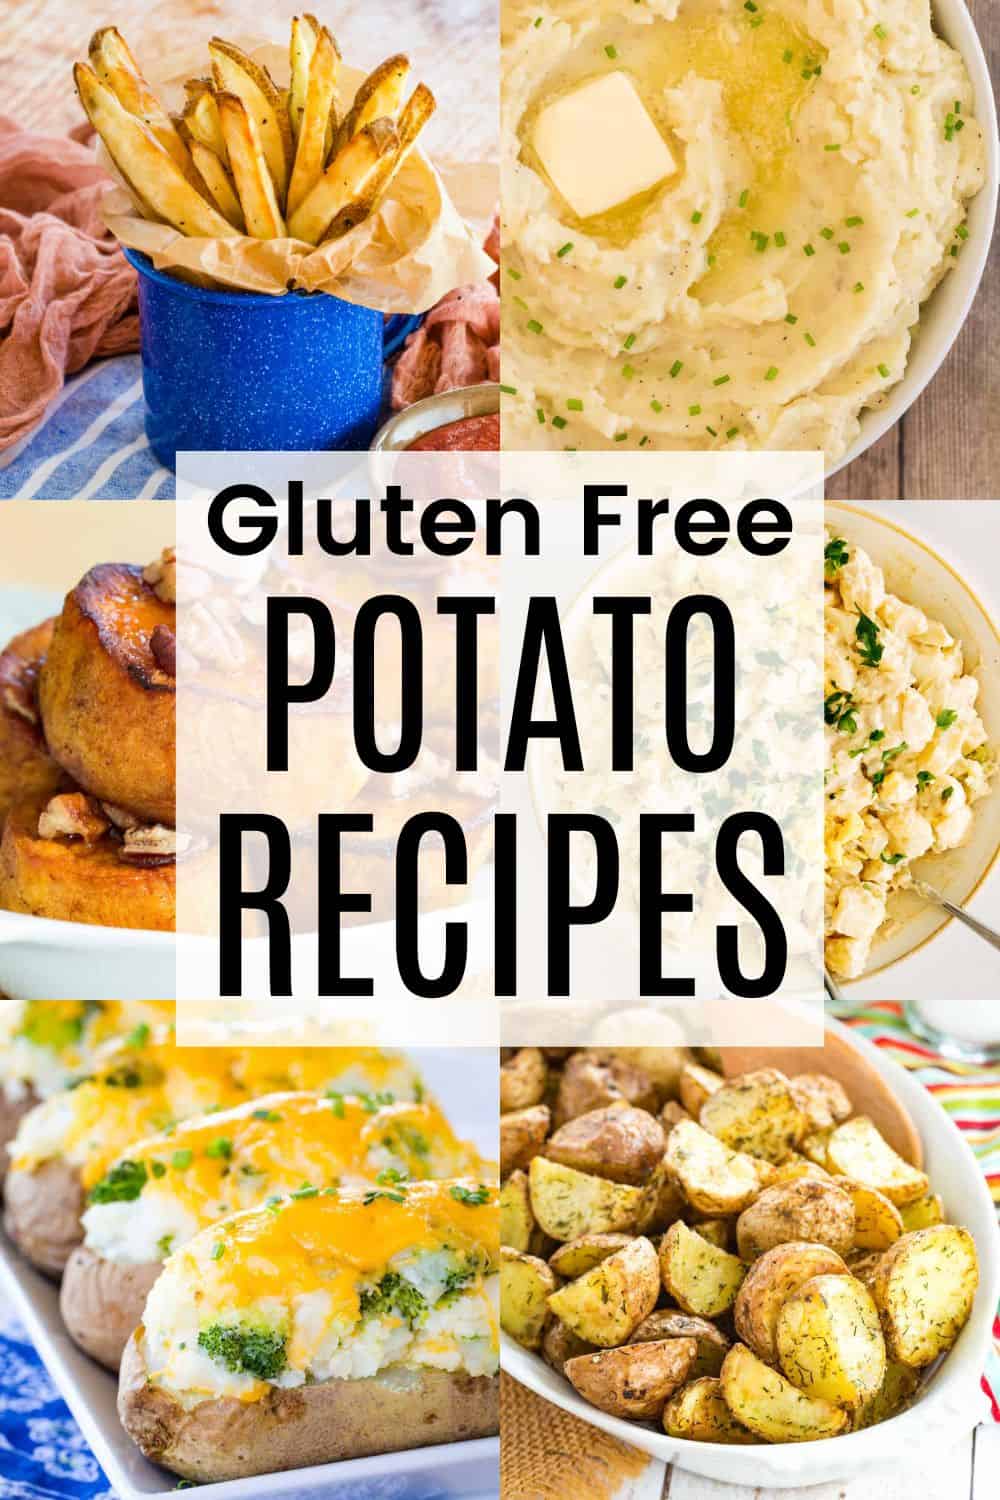 A collage of potato dished like stuffed baked potatoes and mashed potatoes with a text overlay that says "Gluten Free Potato Recipes".